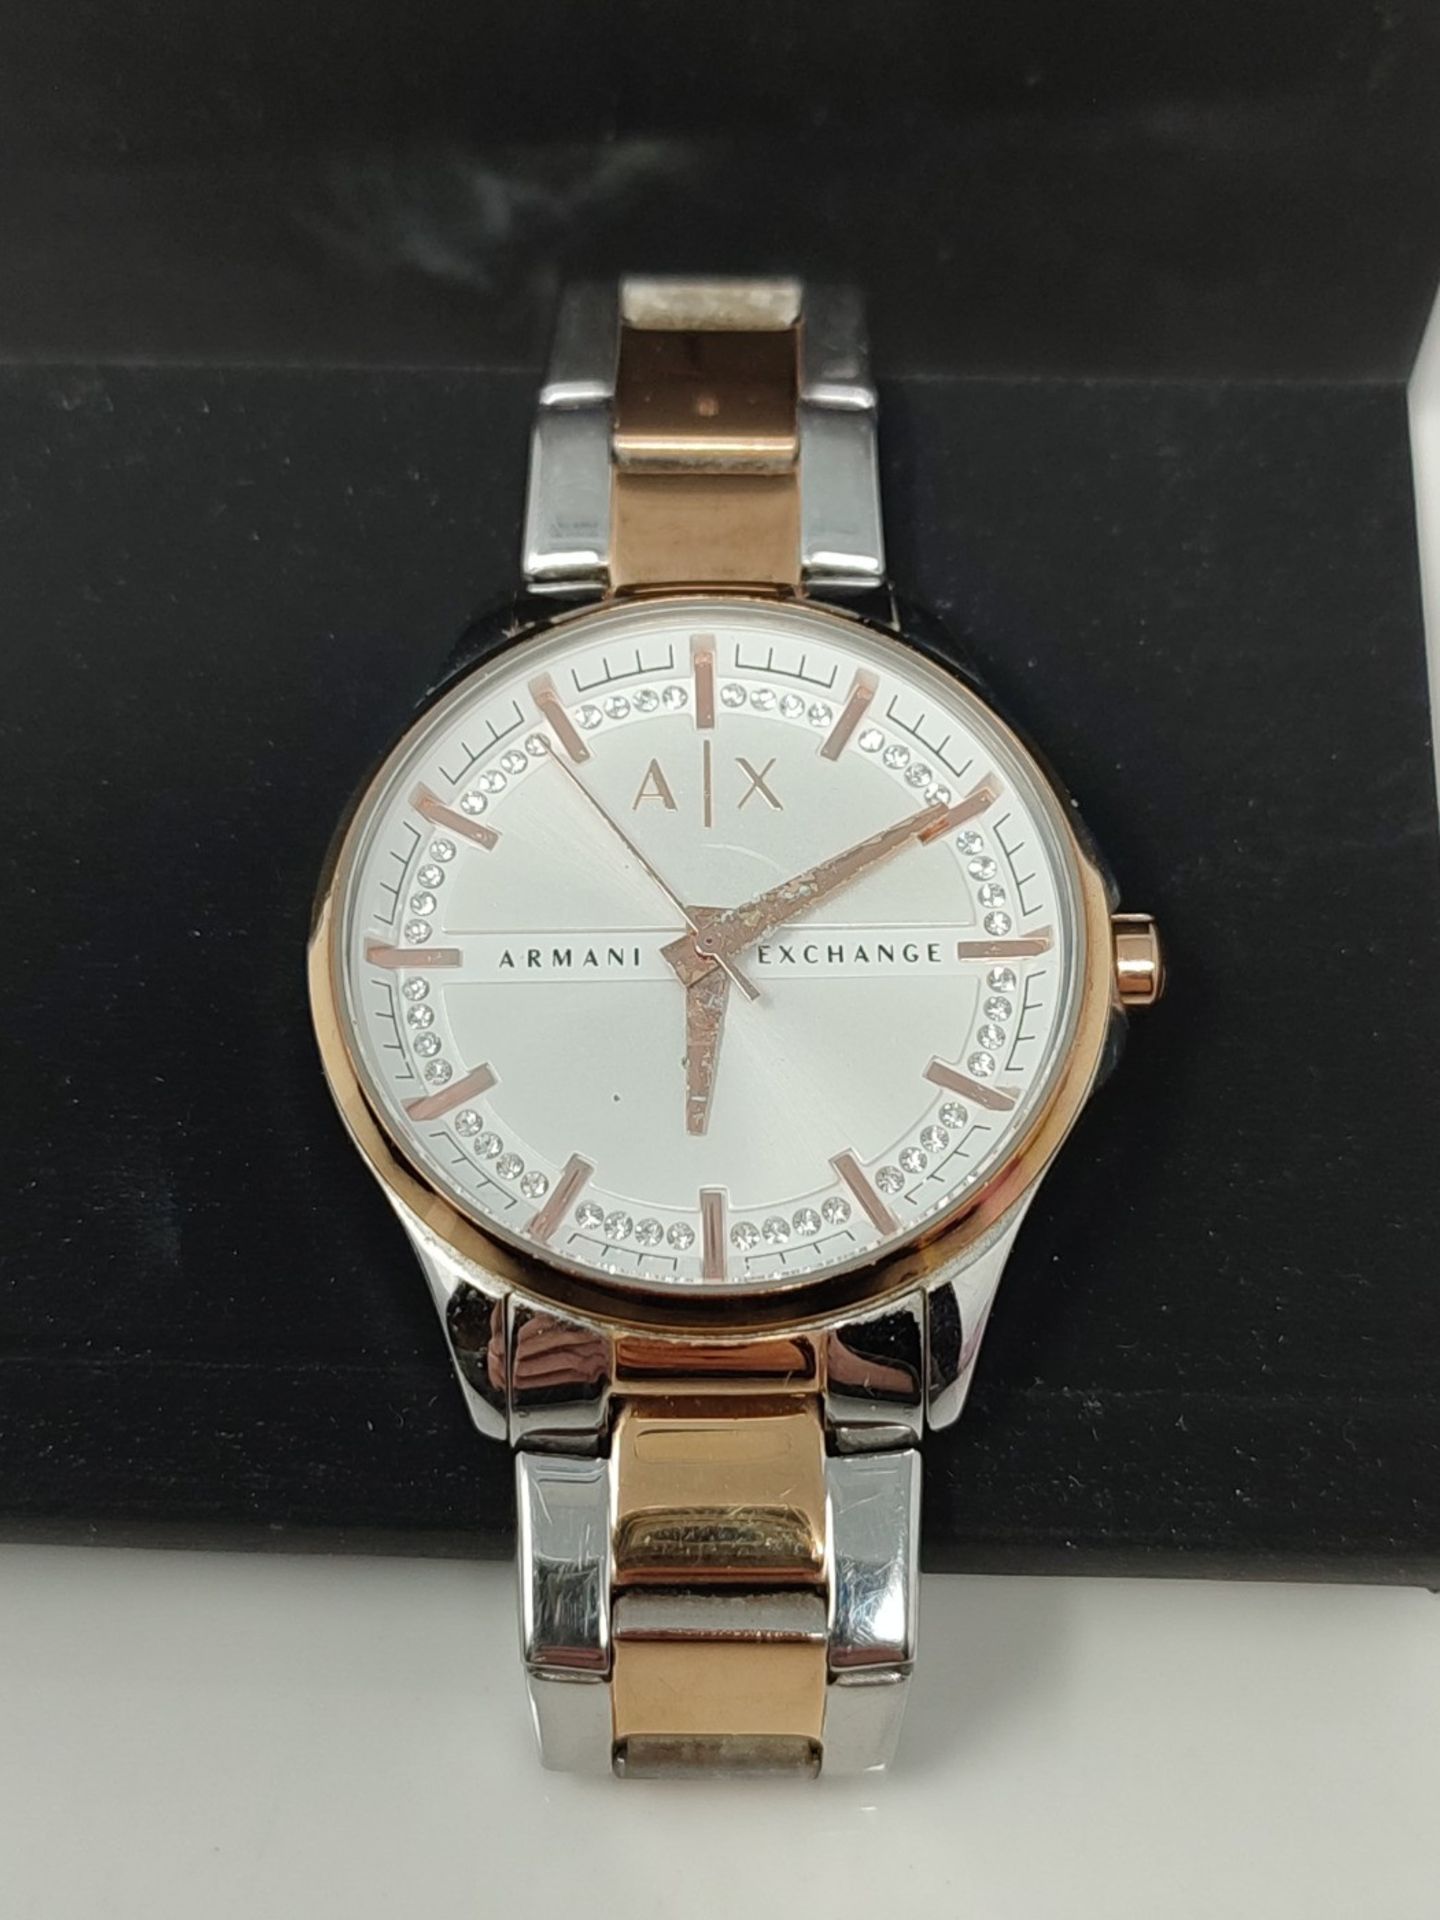 RRP £169.00 Armani Exchange Women's Three-Hand, Stainless Steel Watch,36mm case size - Image 3 of 3